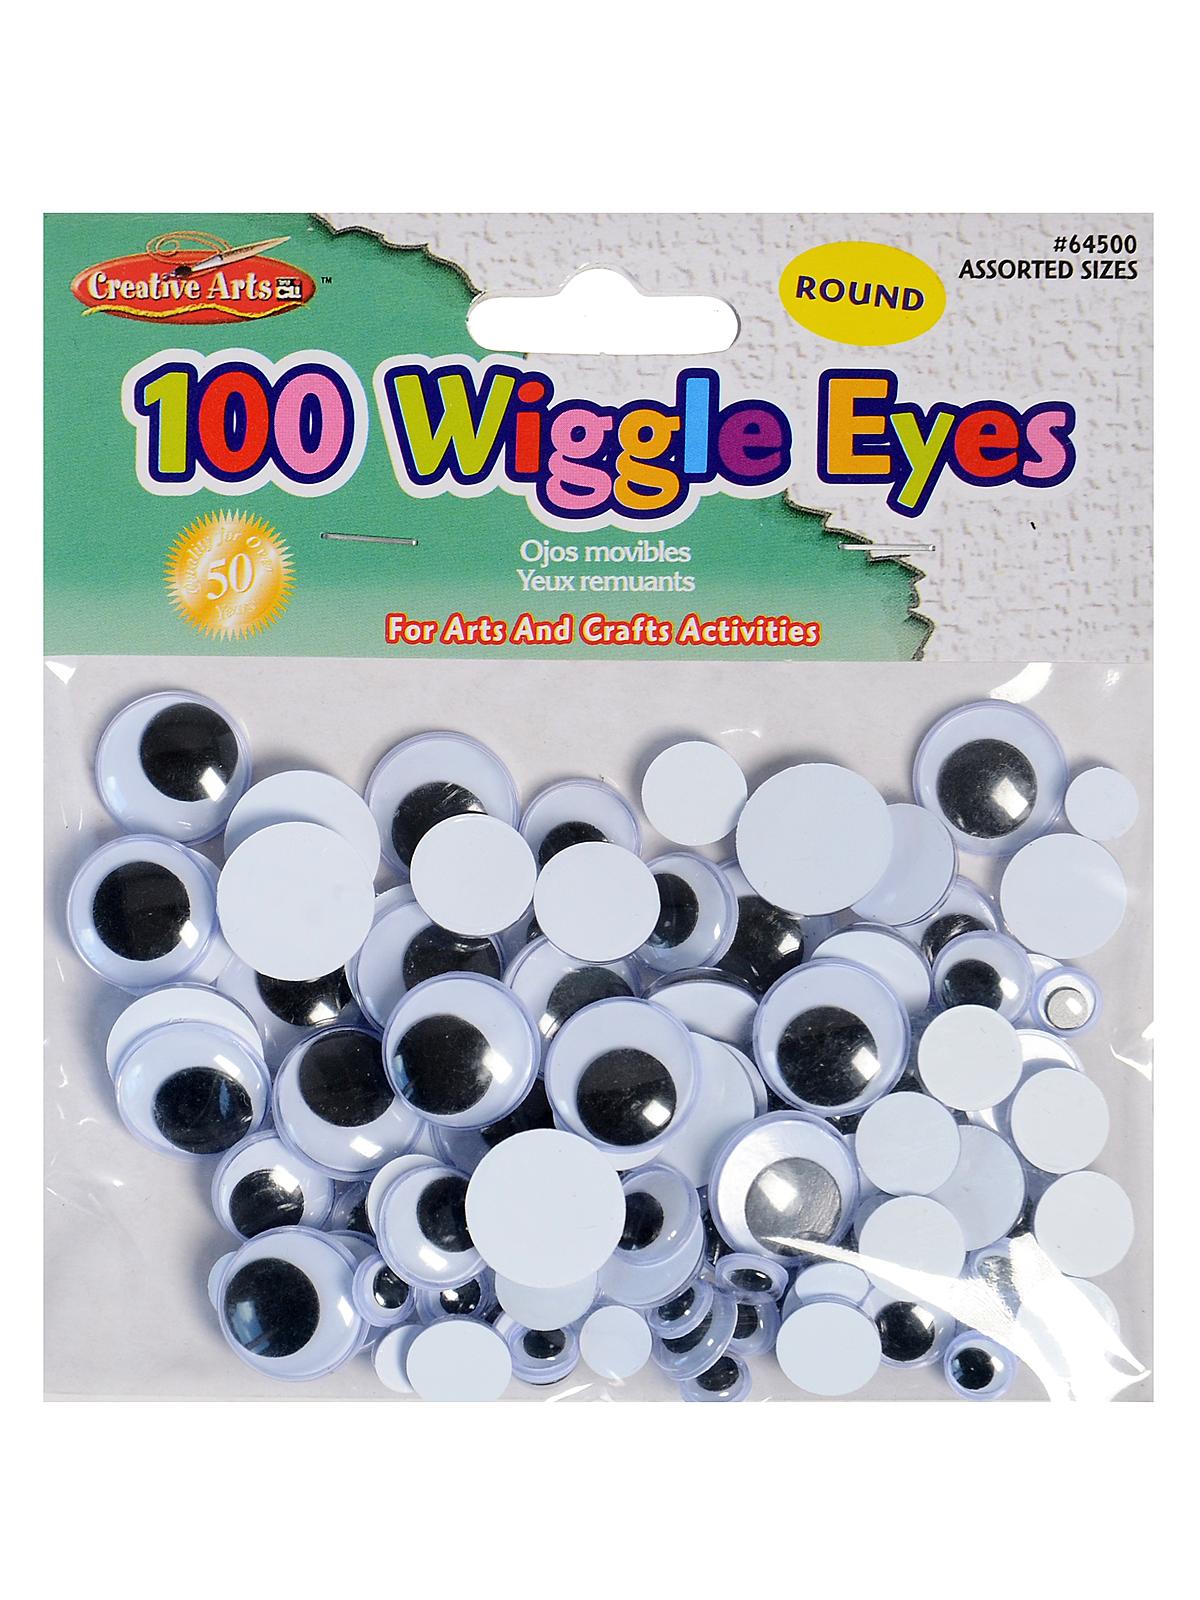 Wiggle Eyes 100 Pieces; Round Black Assorted